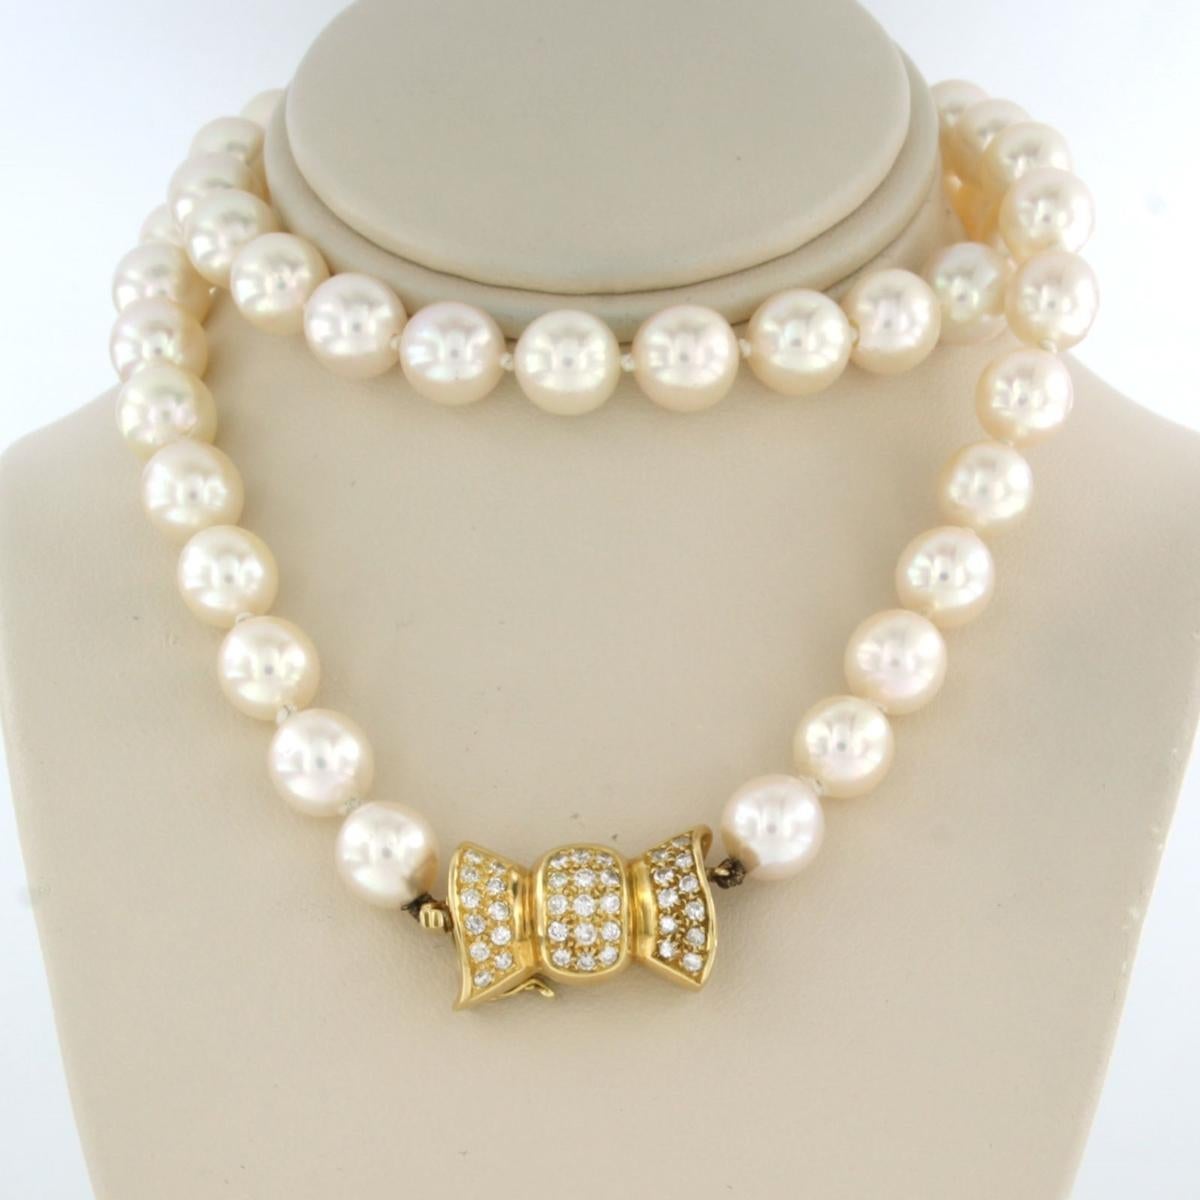 Pearl necklace with 18k yellow gold clasp set with brilliant cut diamonds up to. 0.37 ct - G/H - SI - 50 cm

detailed description:

length of the necklace is 50 cm long

the dimensions of the lock are 2.0 cm by 1.2 cm wide

estimated weight of the